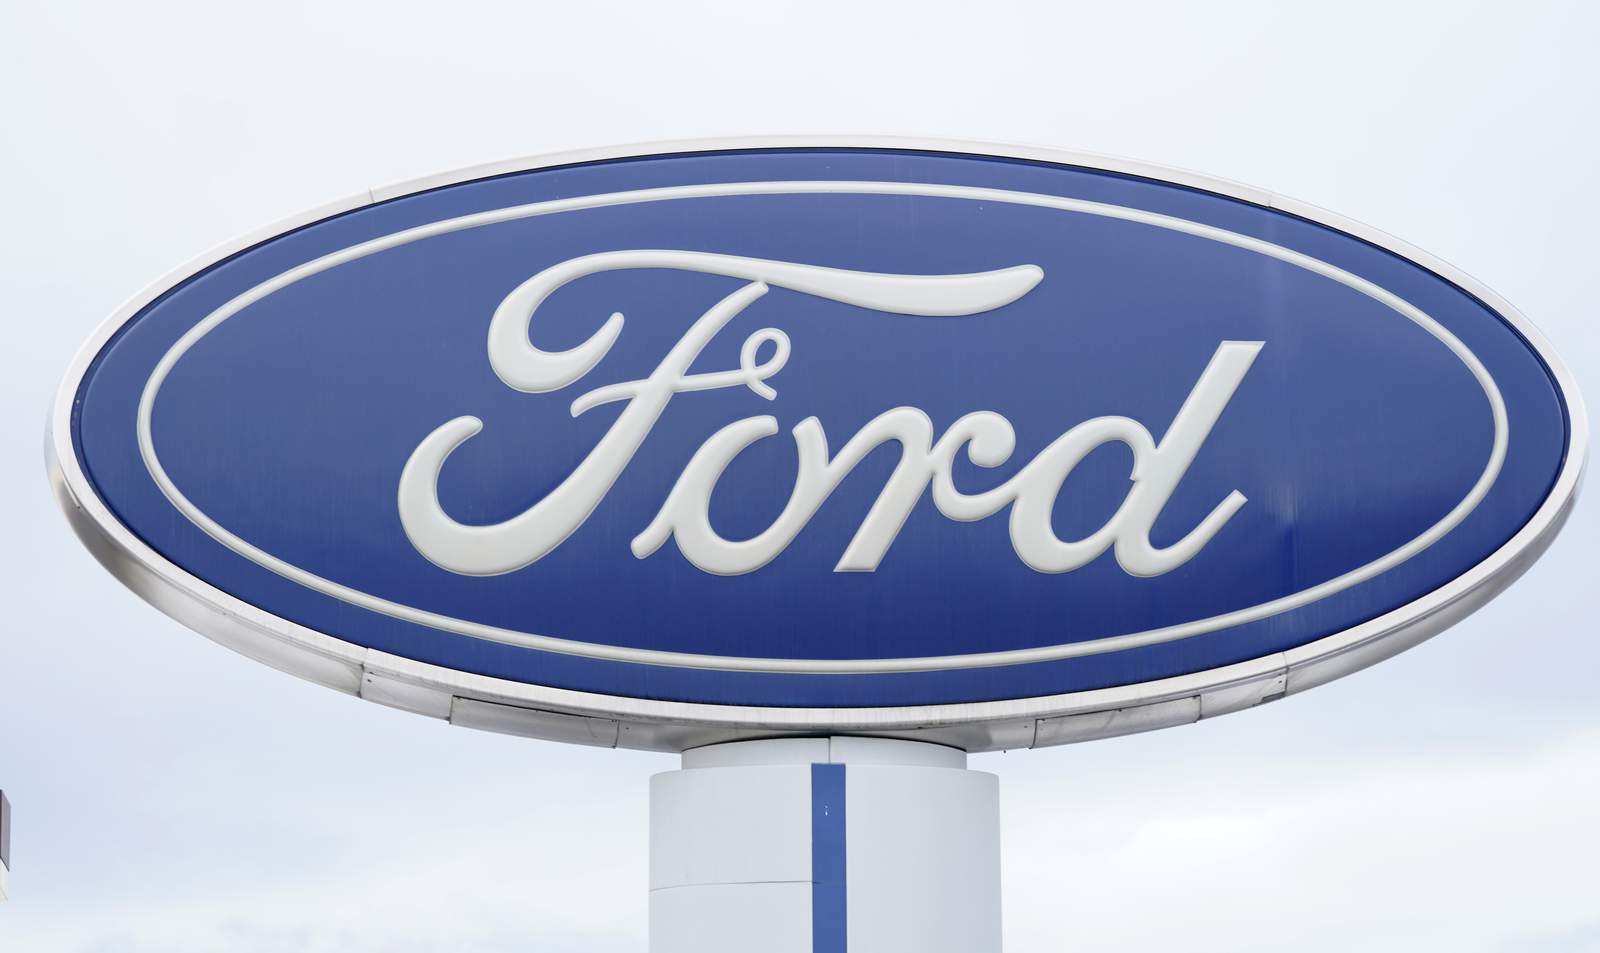 Ford loses track of dangerous air bags, forcing 2 recalls